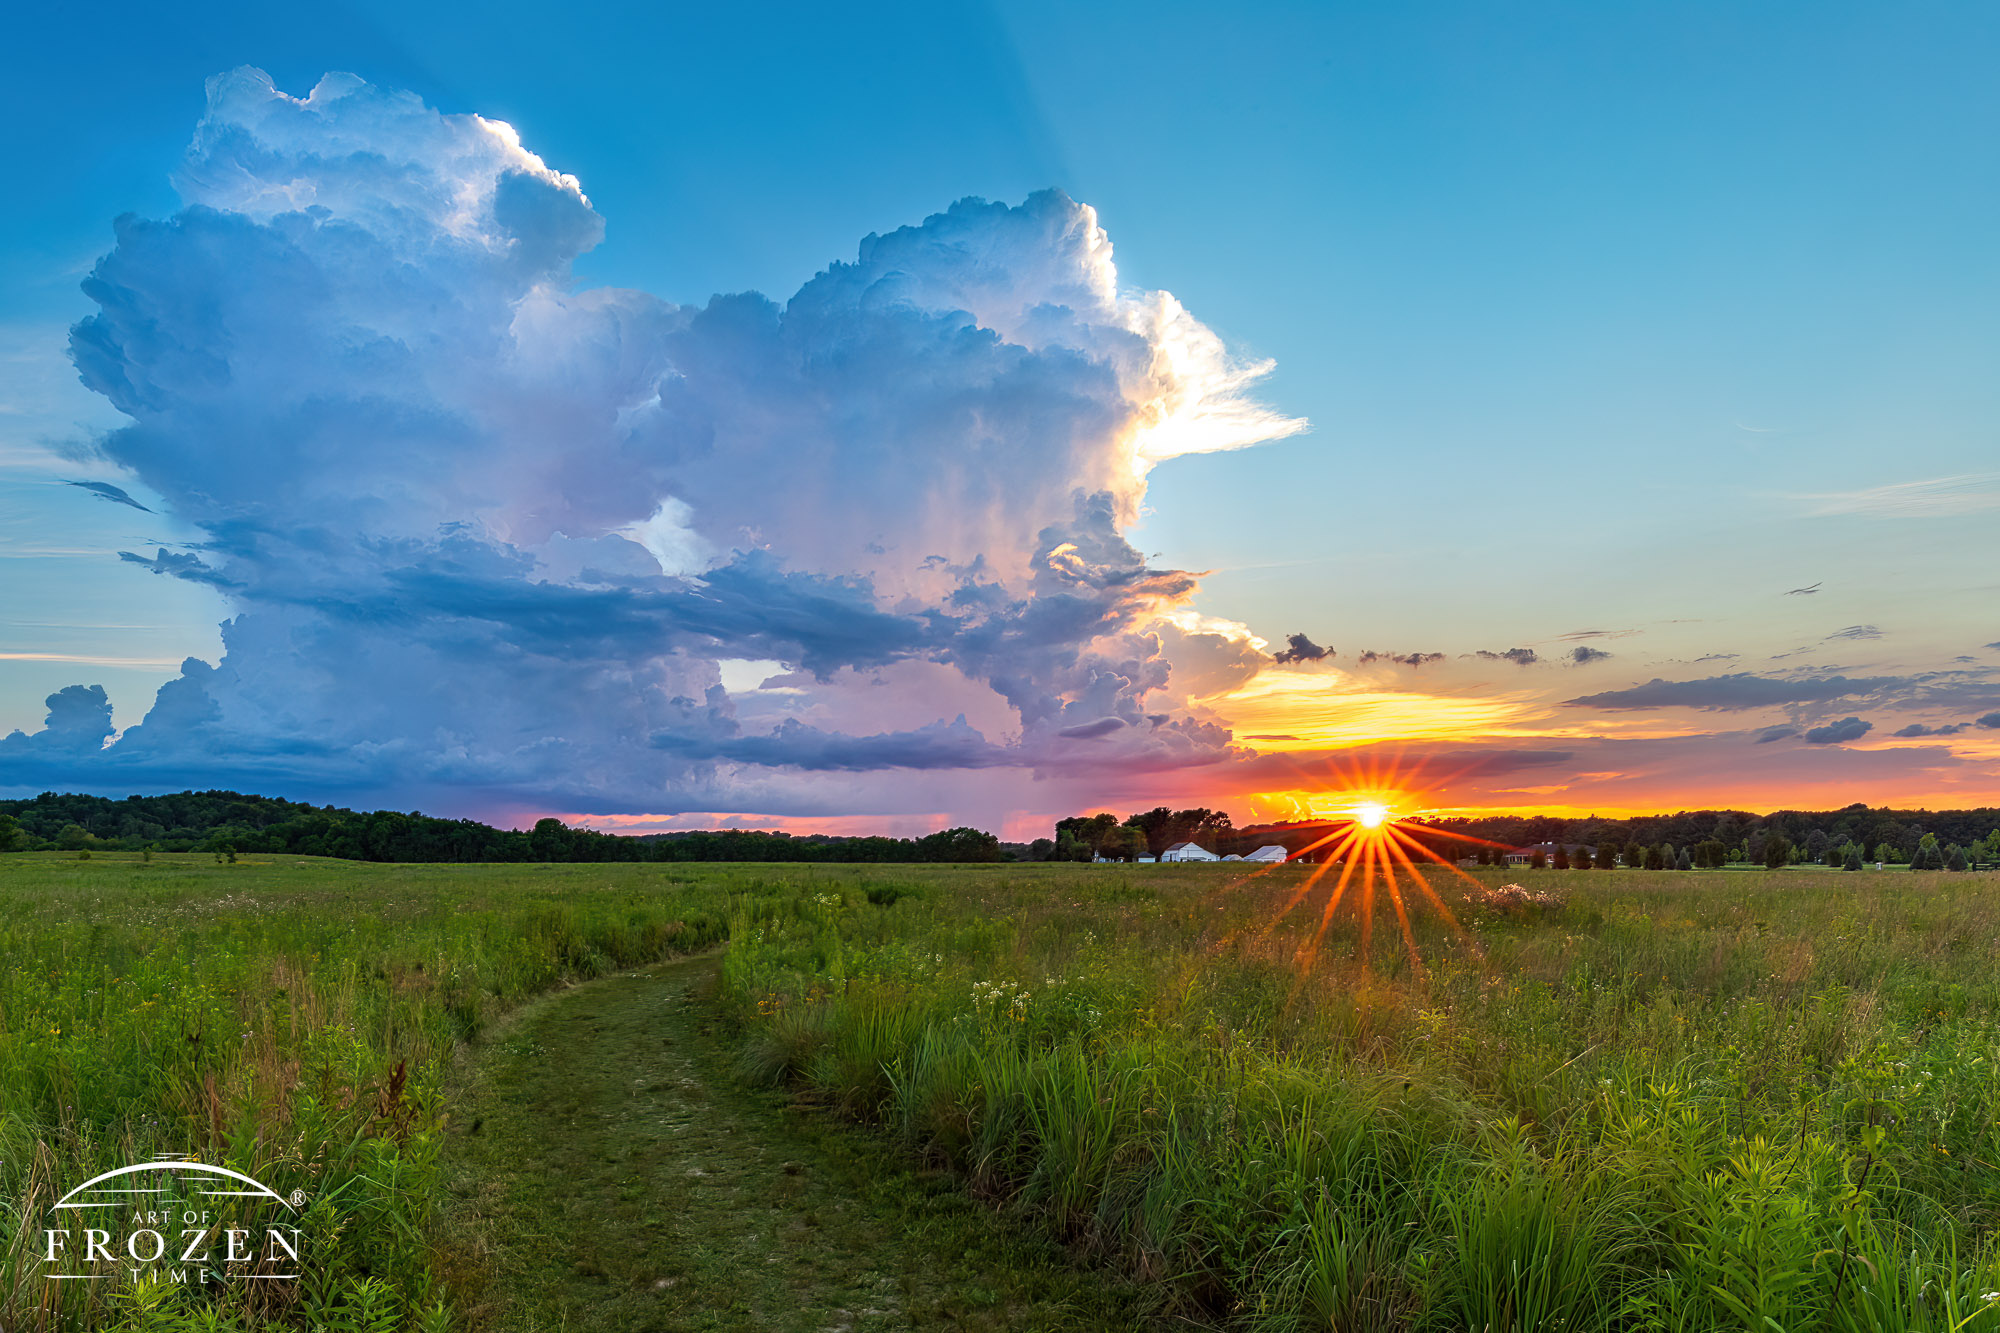 A prairie trail leads the viewer’s eye to the sunburst on the horizon and two cumulonimbus clouds which fill the western sky